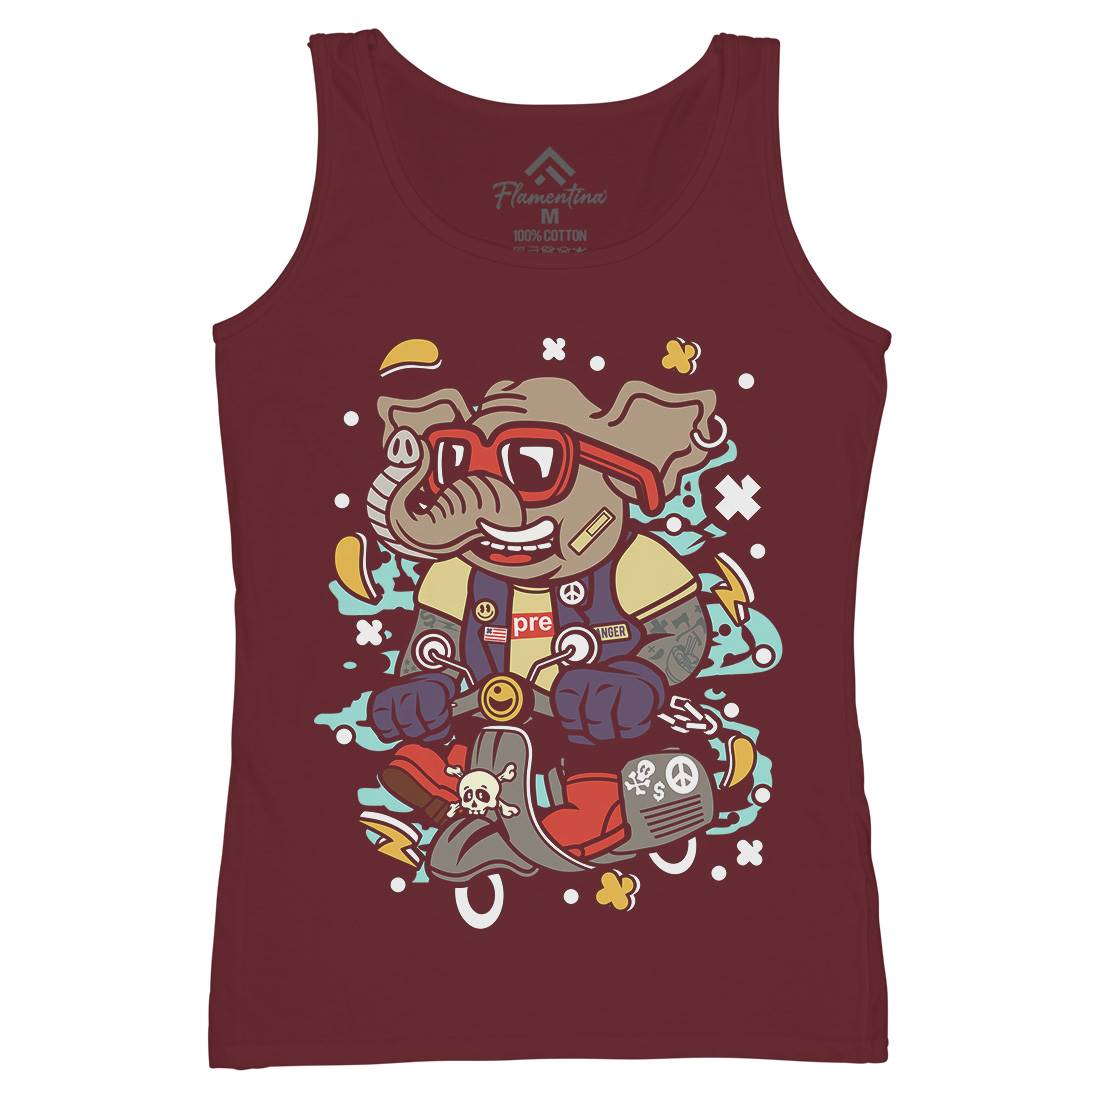 Elephant Scooter Womens Organic Tank Top Vest Motorcycles C544